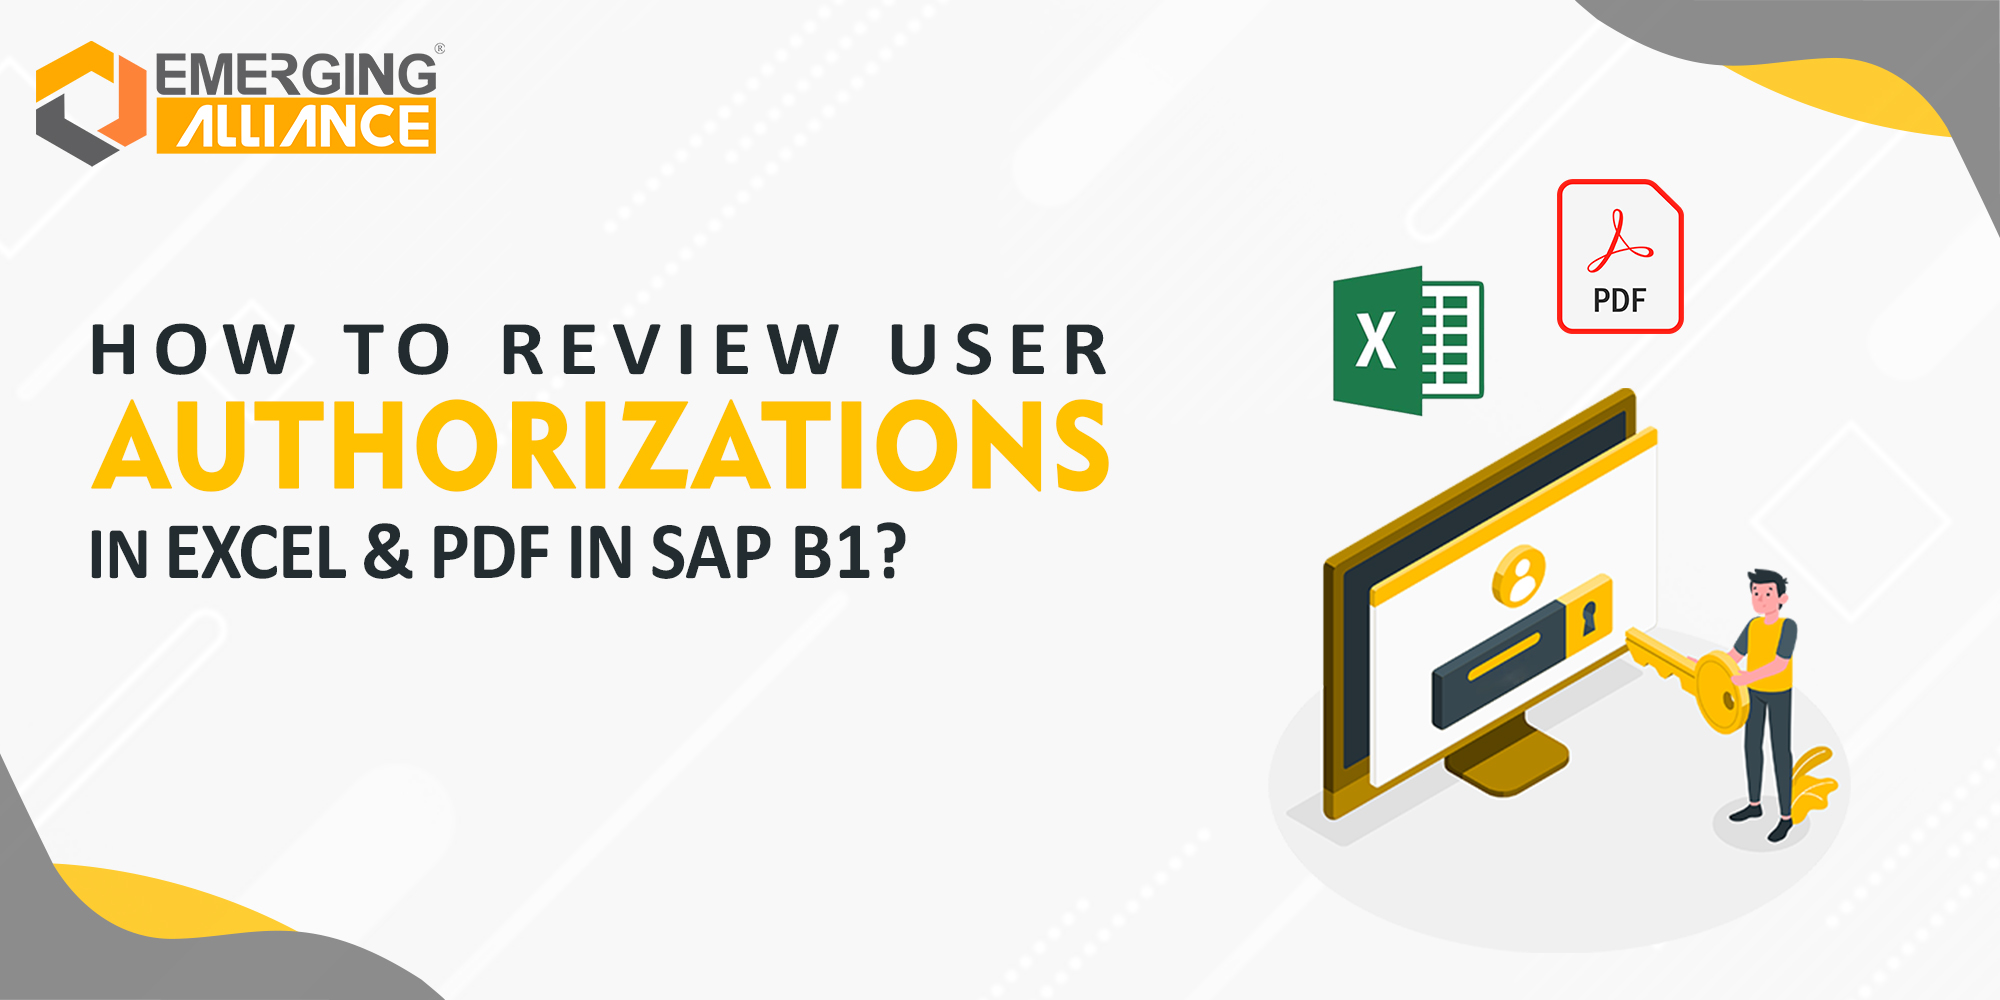 USER AUTHORIZATION TO PDF IN SAP B1